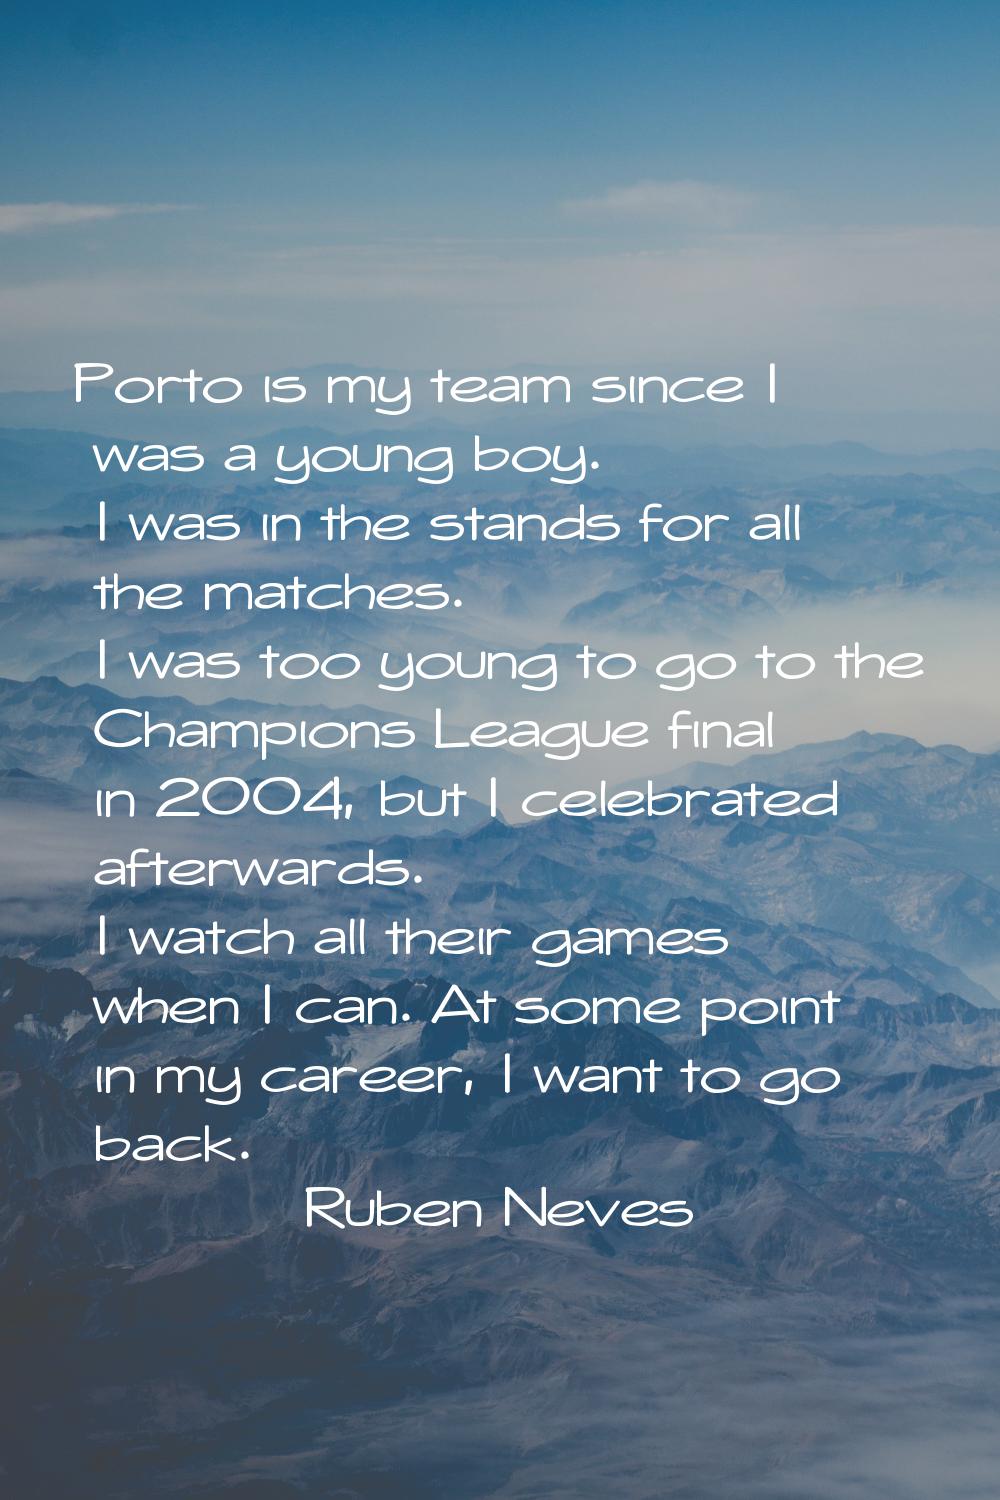 Porto is my team since I was a young boy. I was in the stands for all the matches. I was too young 